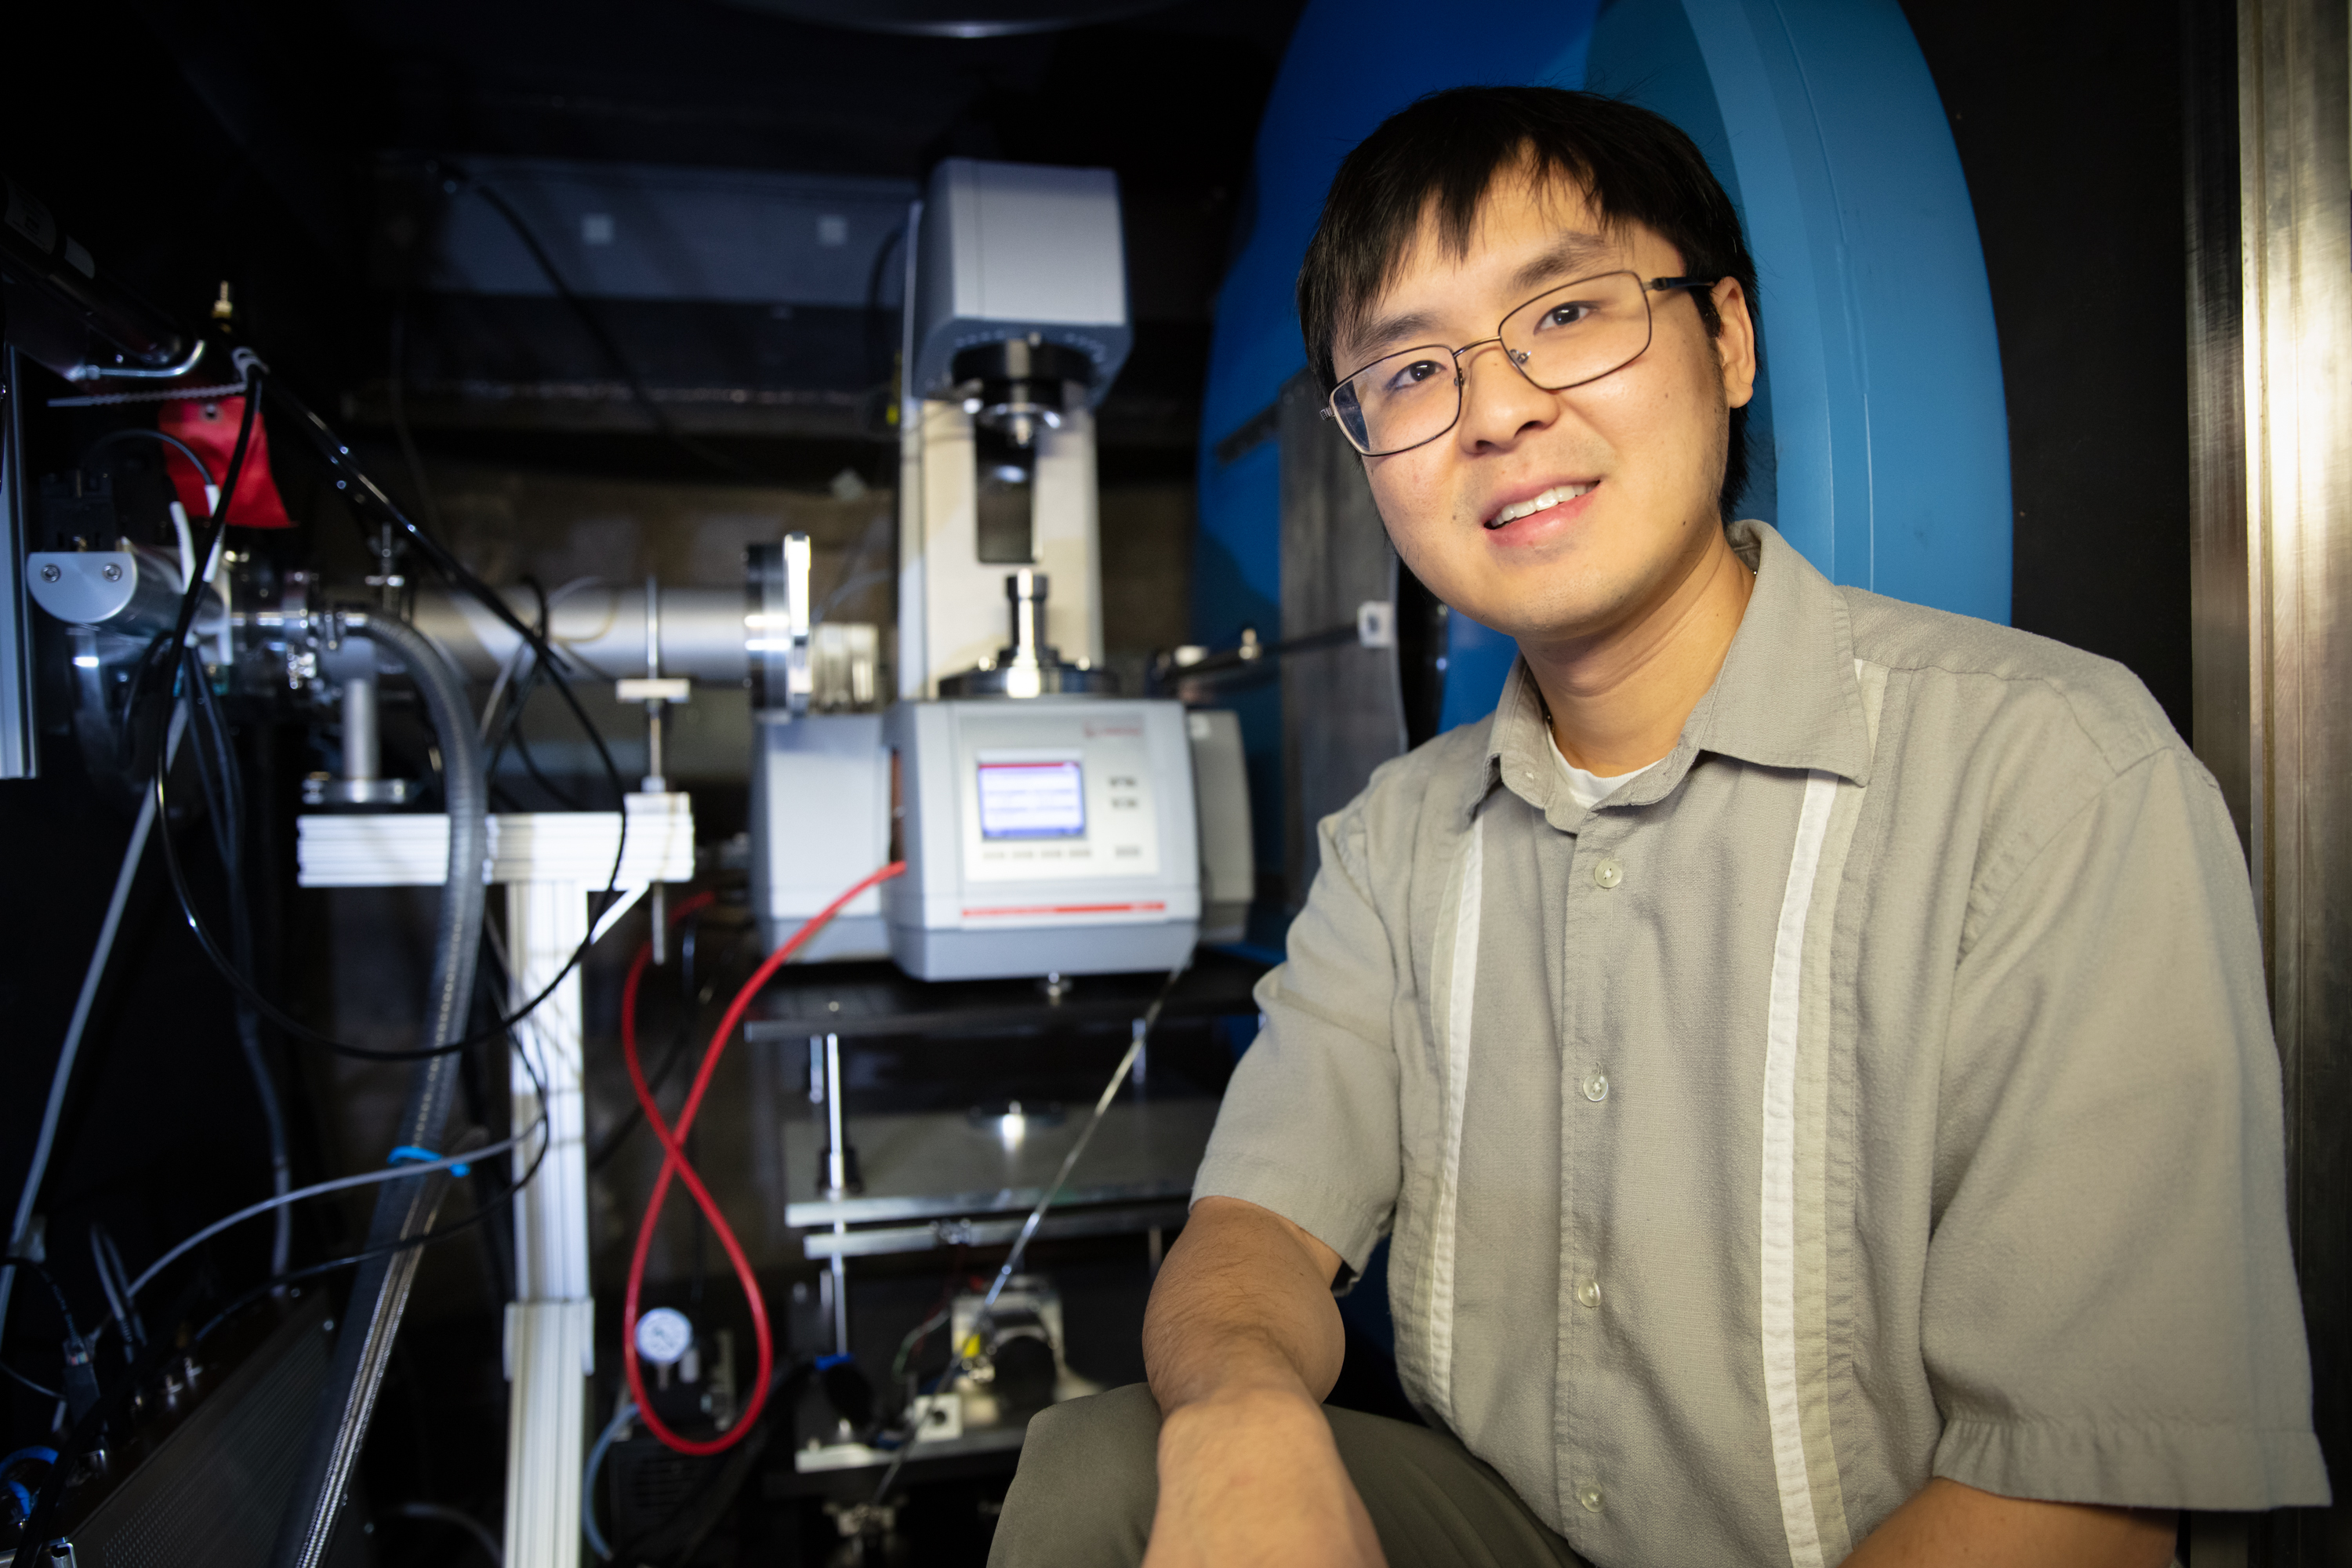 The rheo-SANS environment allowed ORNL’s Christopher Lam to investigate the response properties of polymer gels at the EQ-SANS beamline at the Spallation Neutron Source. (Credit: ORNL/Genevieve Martin)